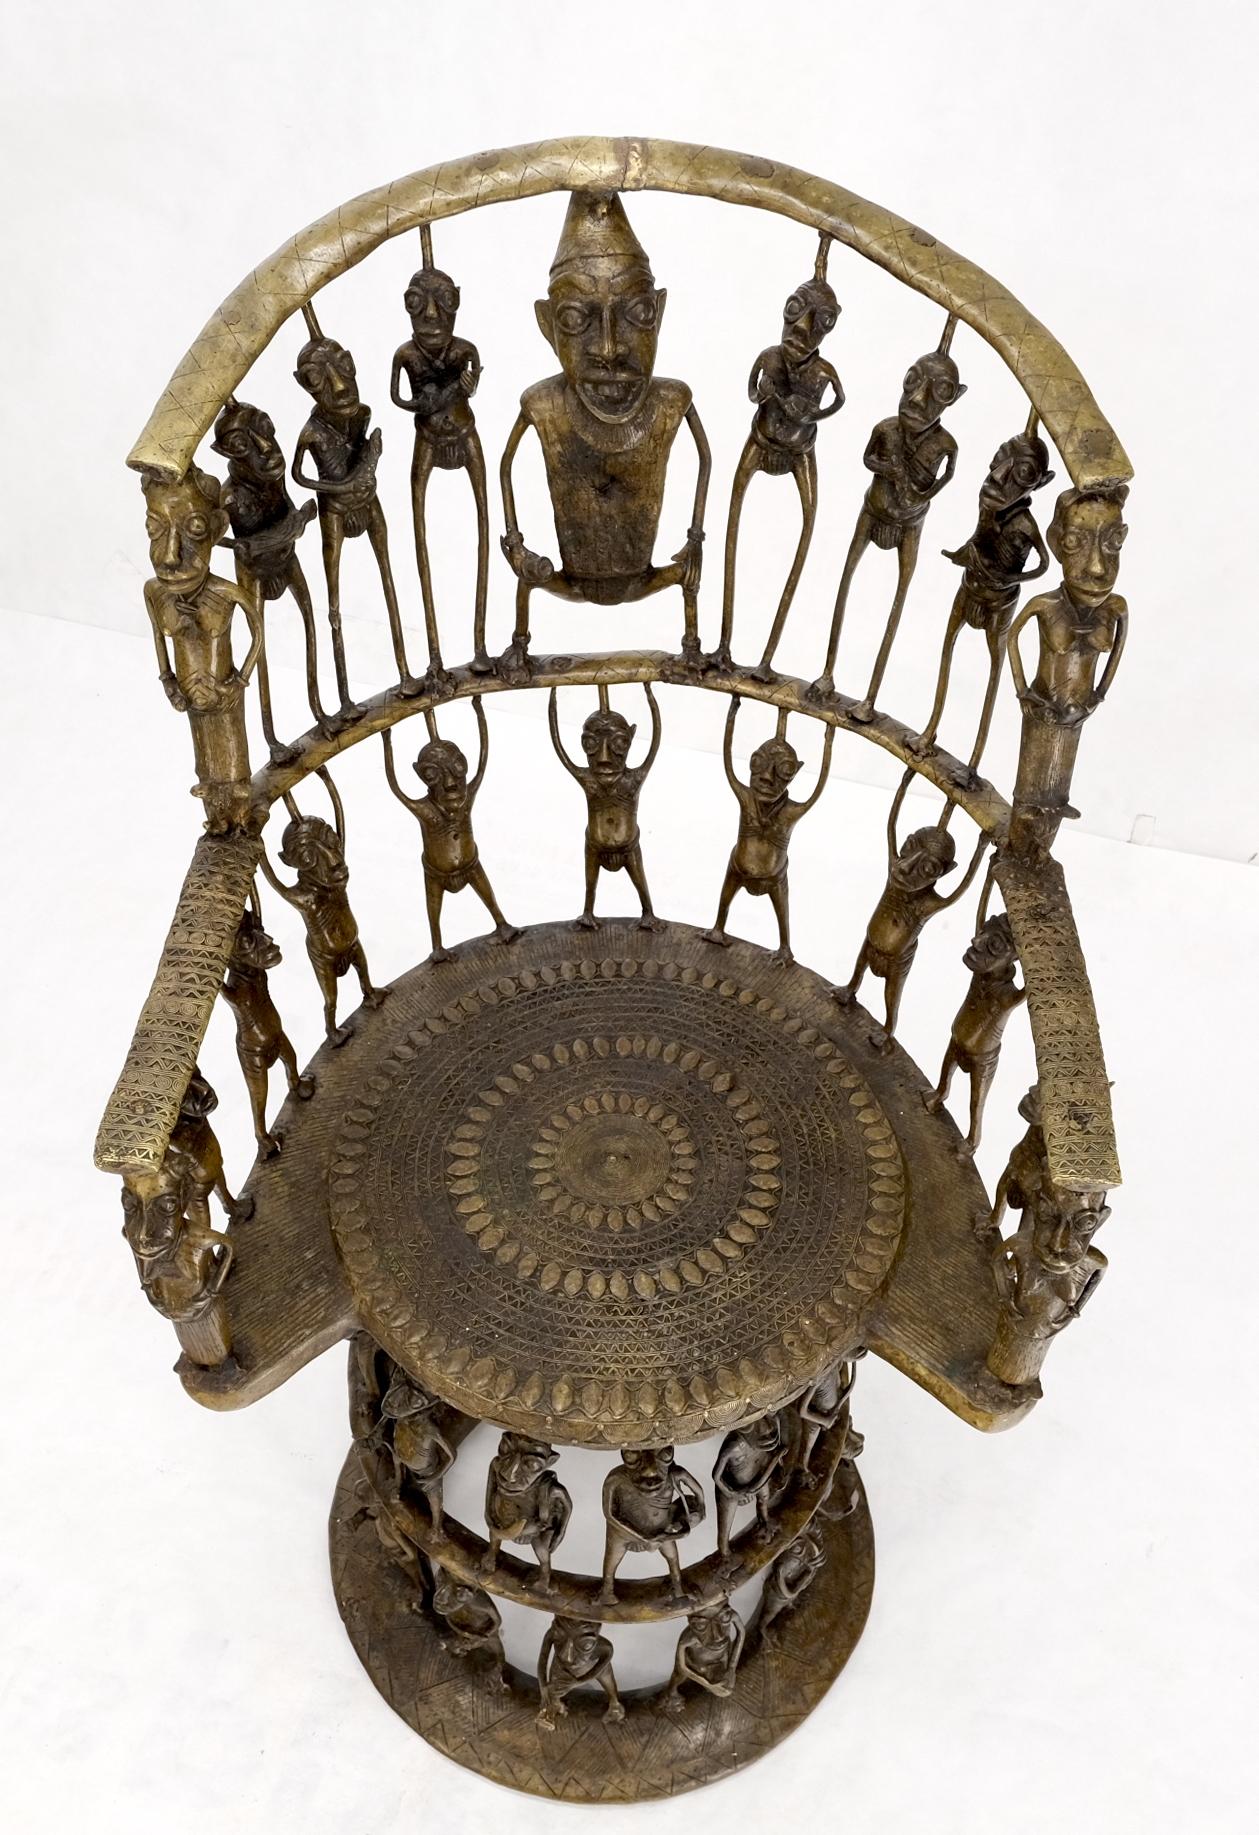 This decorative bronze chair consists of 44 full-figure sculptures. It is made in a style that consciously references pieces from Benin Cameroon West African cultures.